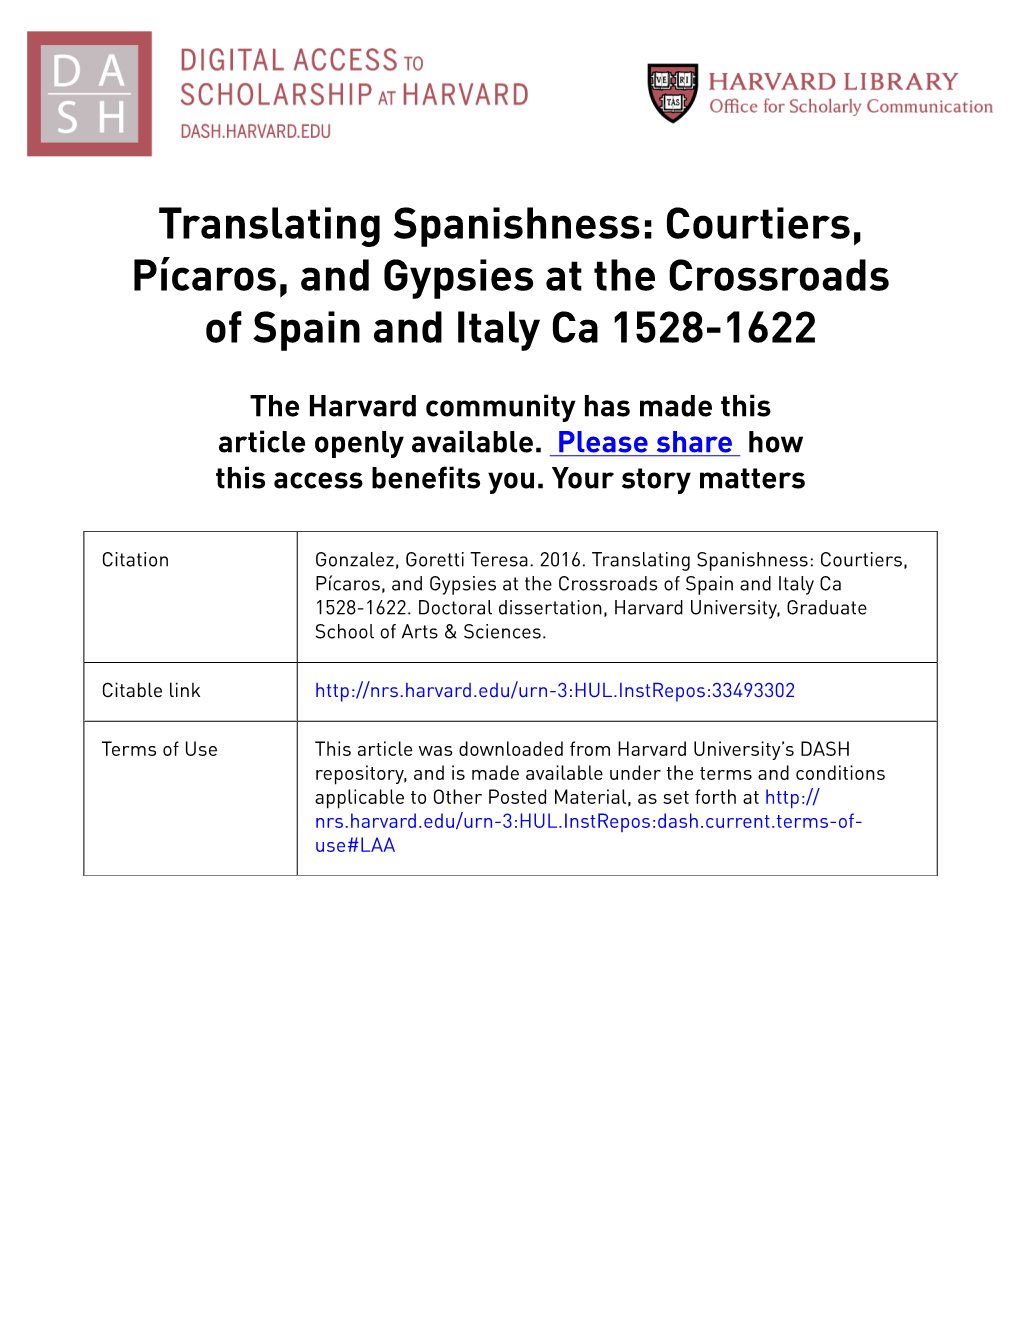 Translating Spanishness: Courtiers, Pícaros, and Gypsies at the Crossroads of Spain and Italy Ca 1528-1622